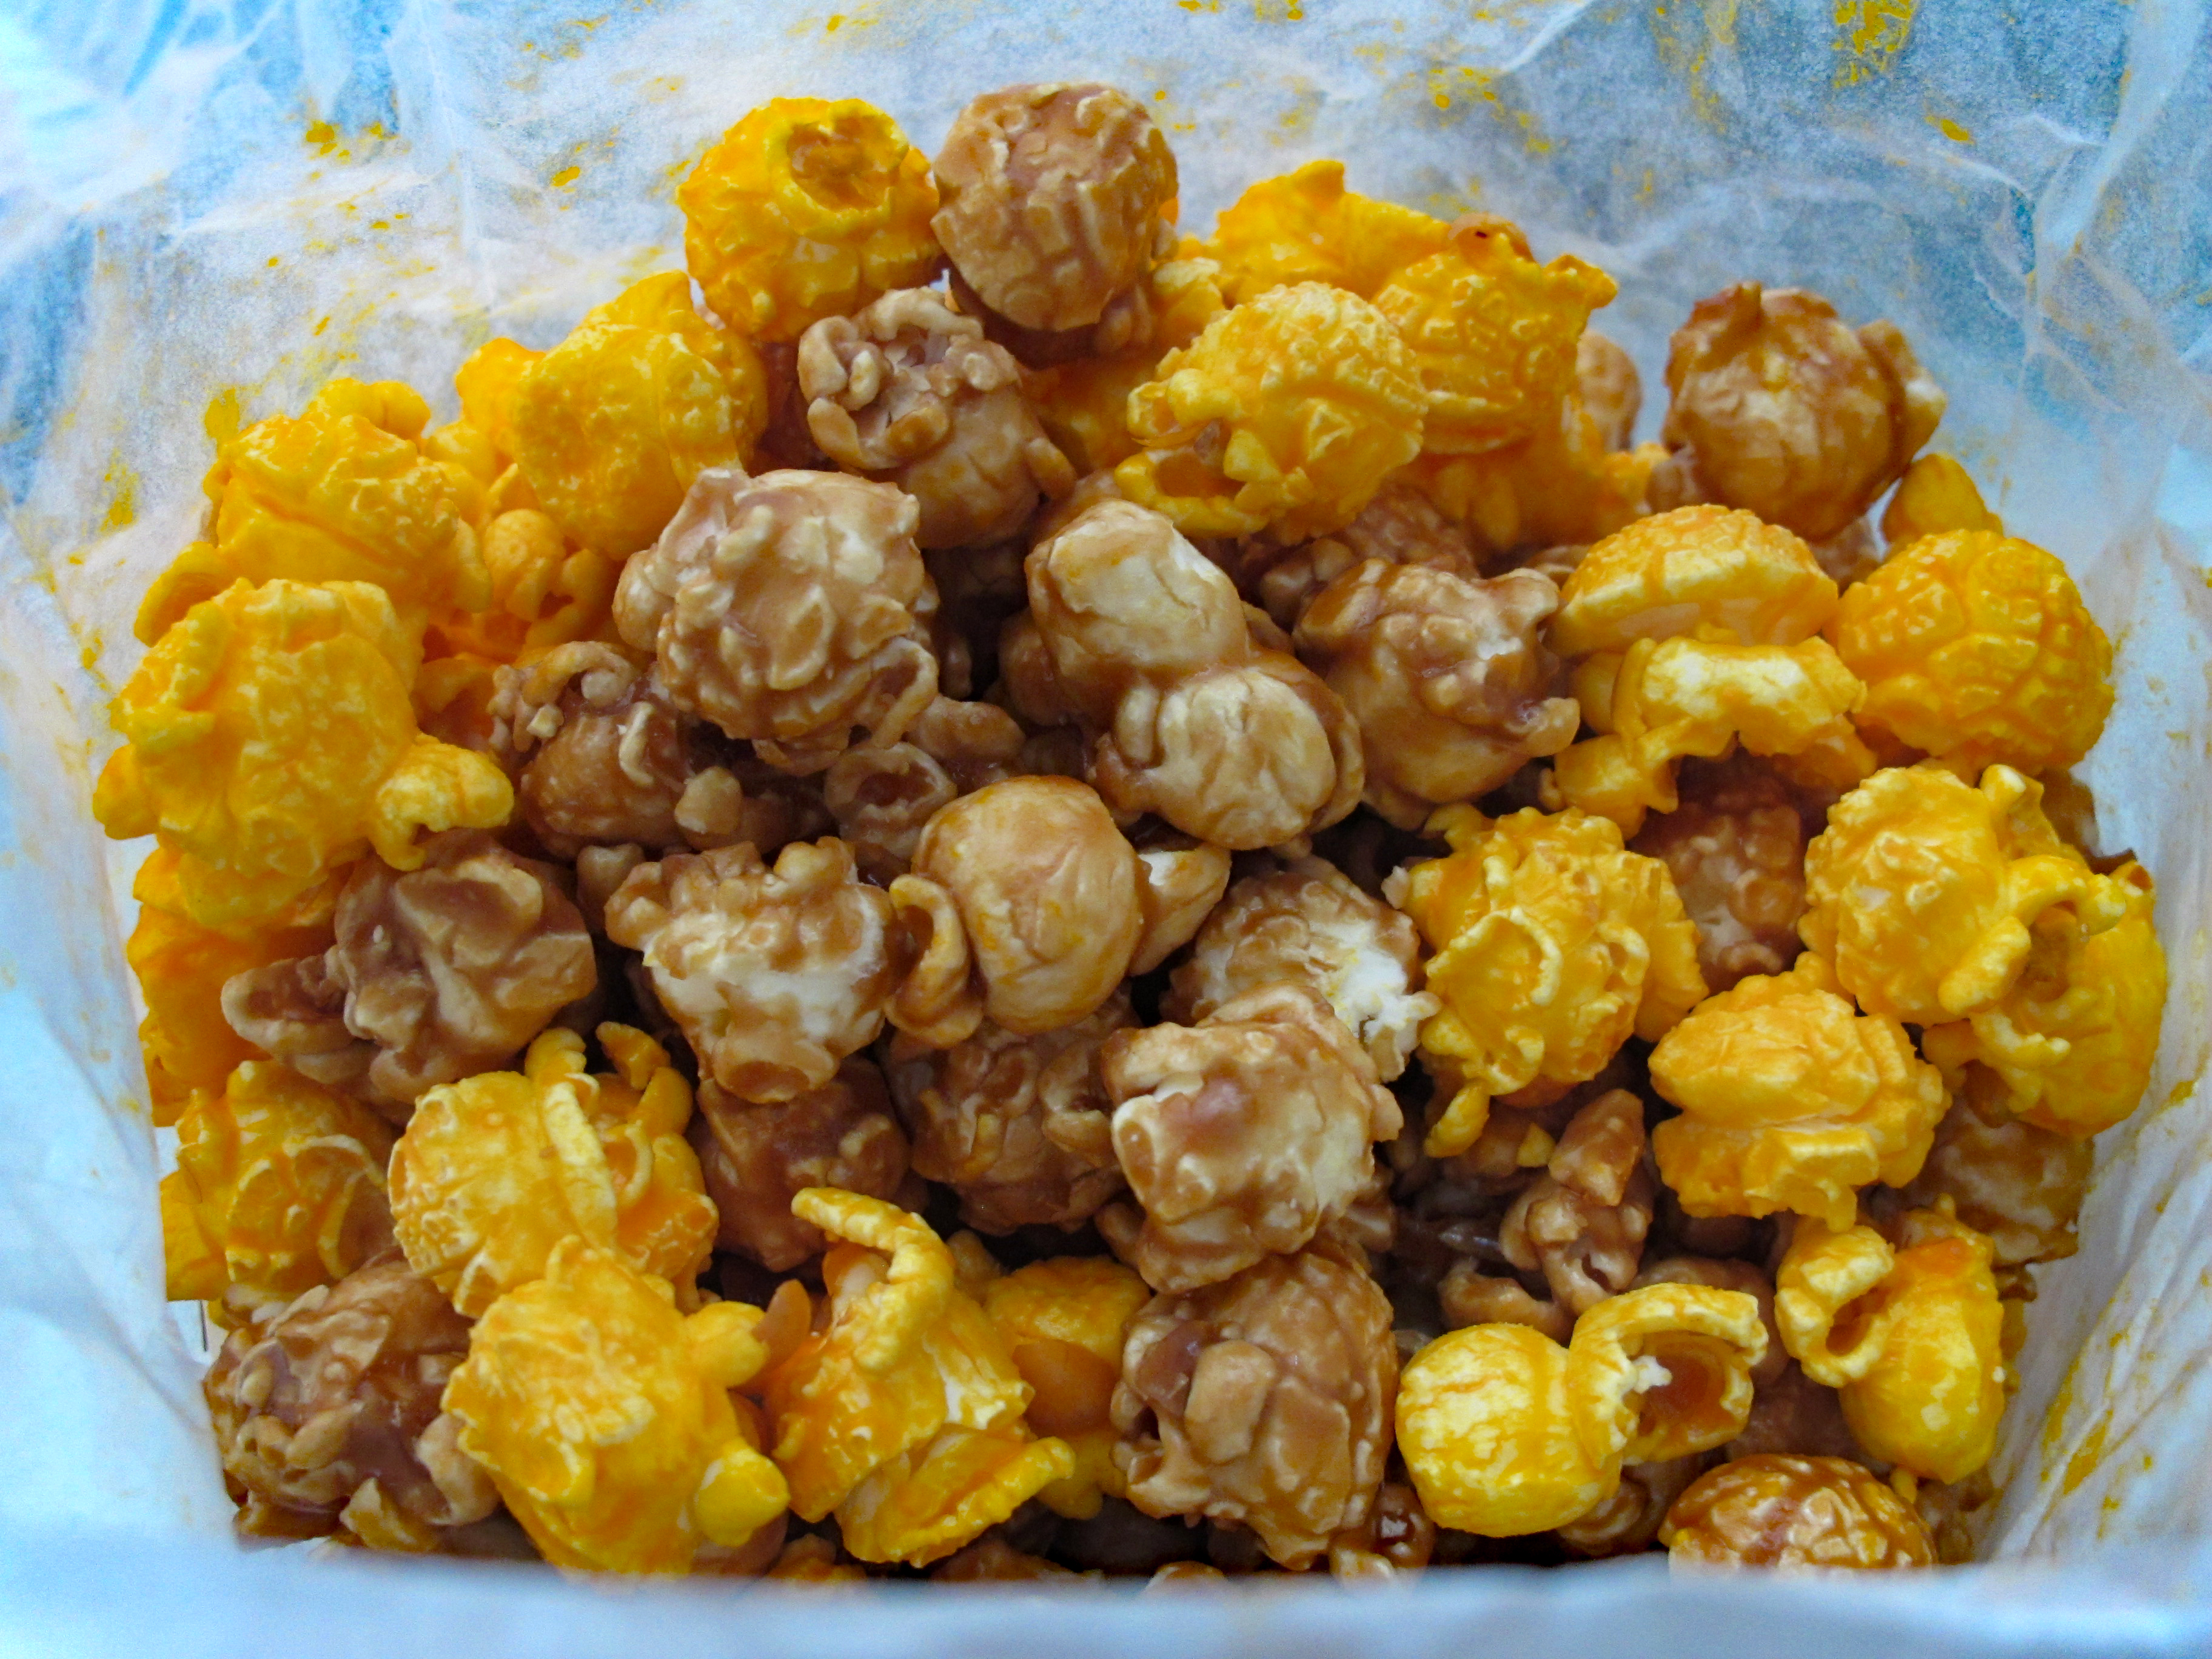 Caramel corn and cheese corn mixed together